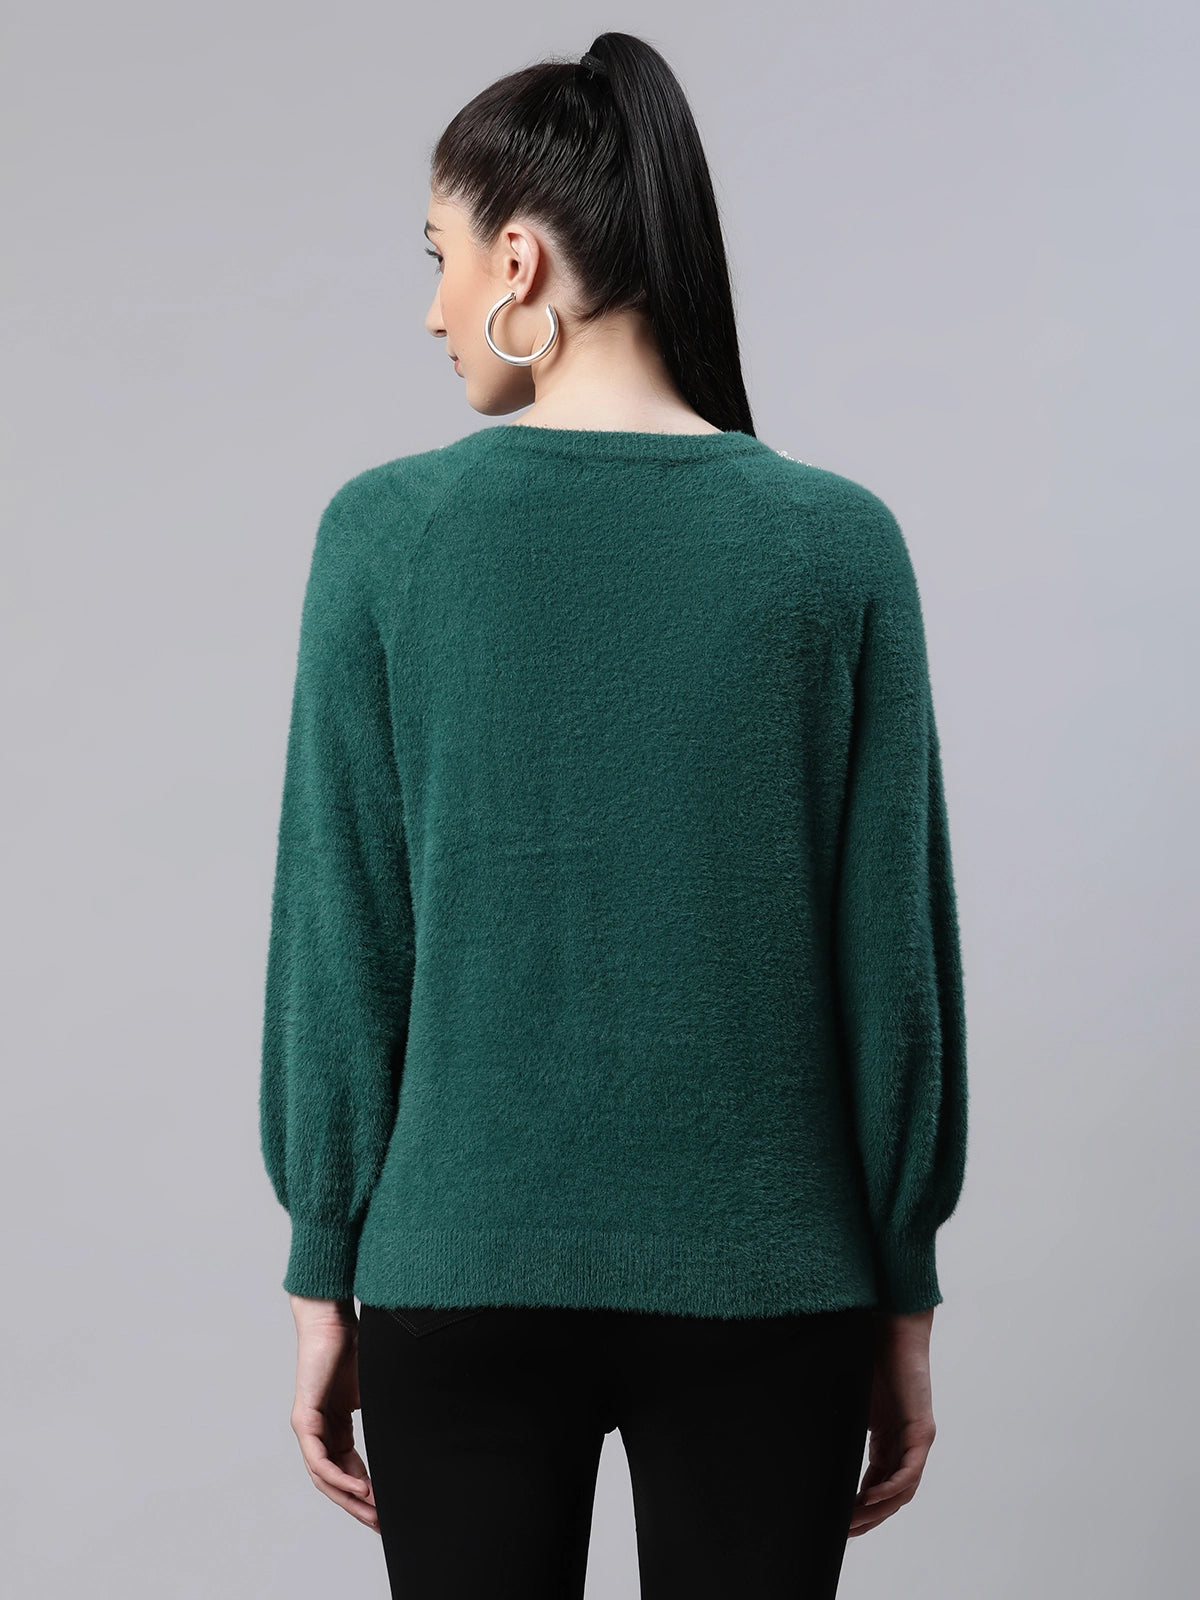  Woolen Loose Fit Casual  With  Green